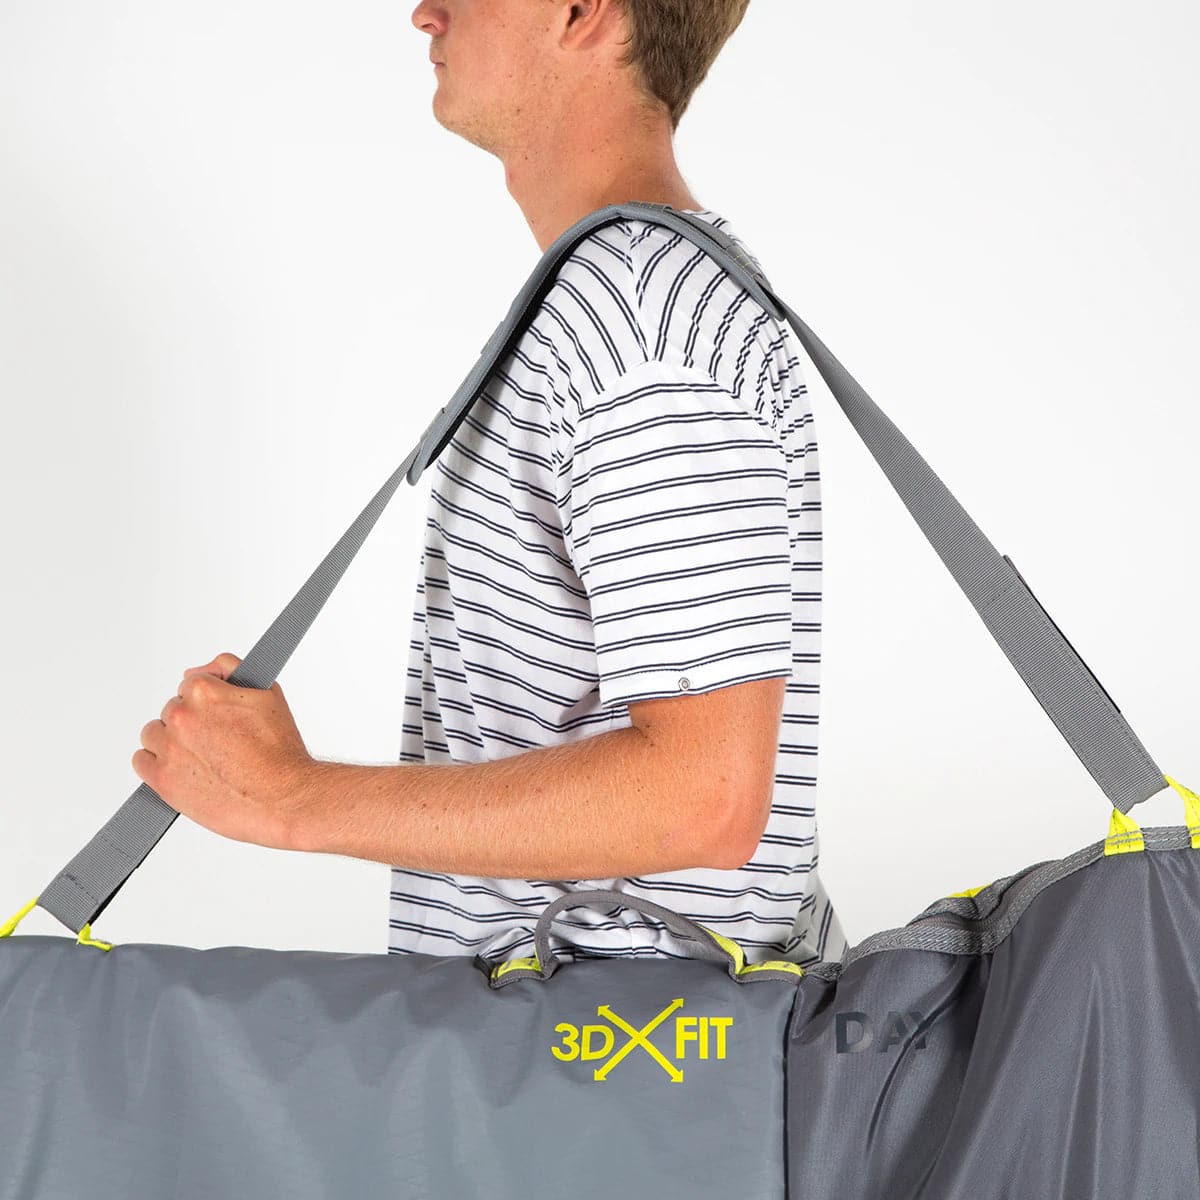 Featuring the SUP Dayrunner Bag 10'6 sup accessory, sup fin manufactured by FCS shown here from a second angle.